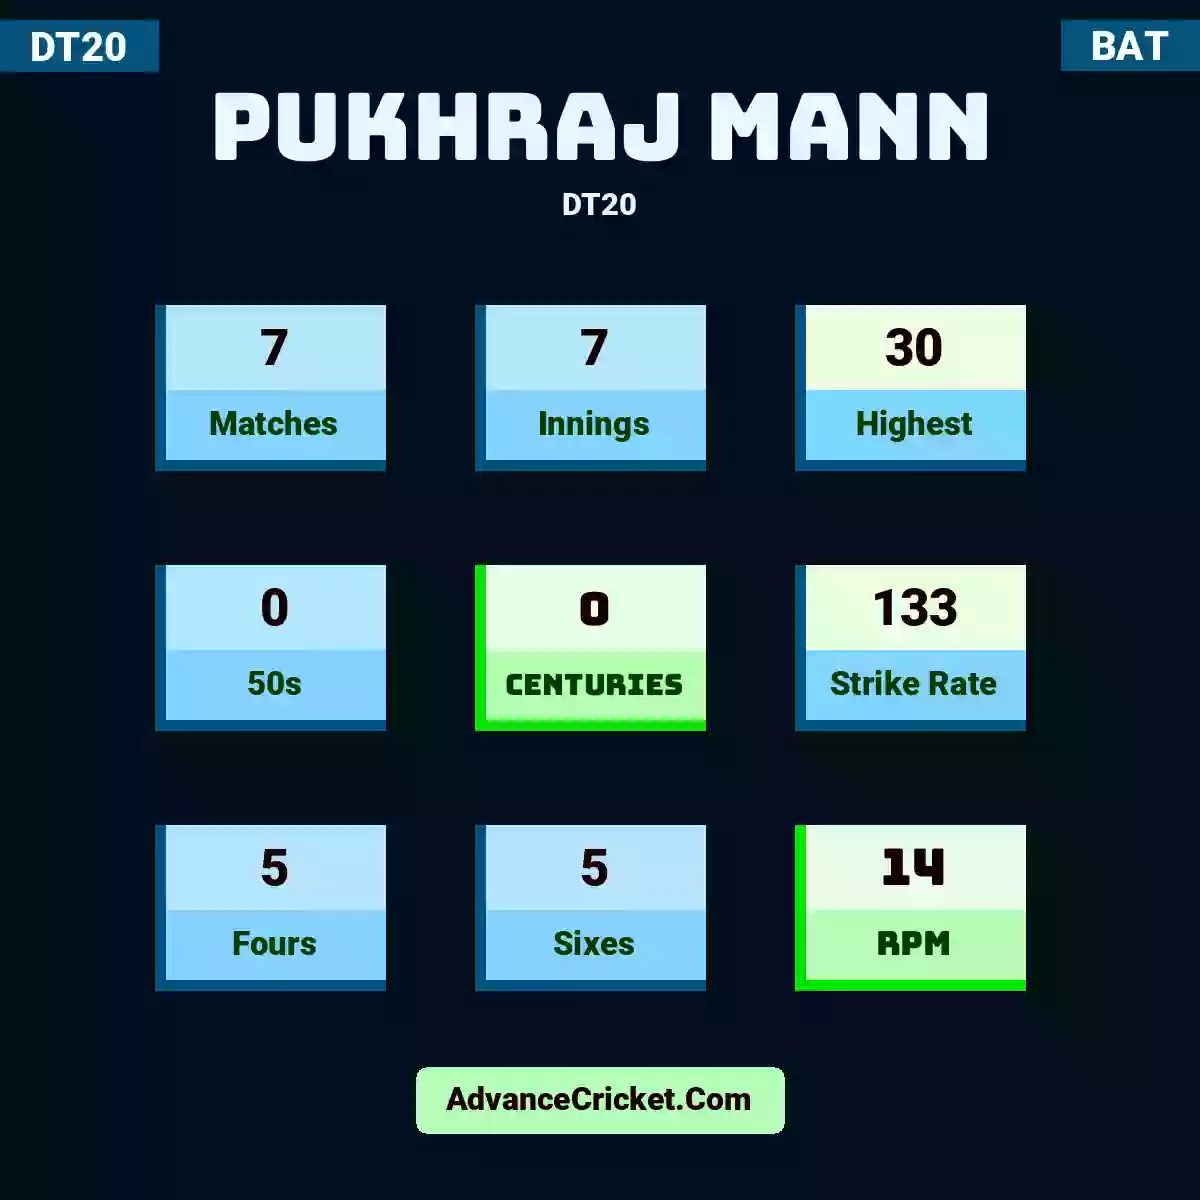 Pukhraj Mann DT20 , Pukhraj Mann played 7 matches, scored 30 runs as highest, 0 half-centuries, and 0 centuries, with a strike rate of 133. P.Mann hit 5 fours and 5 sixes, with an RPM of 14.